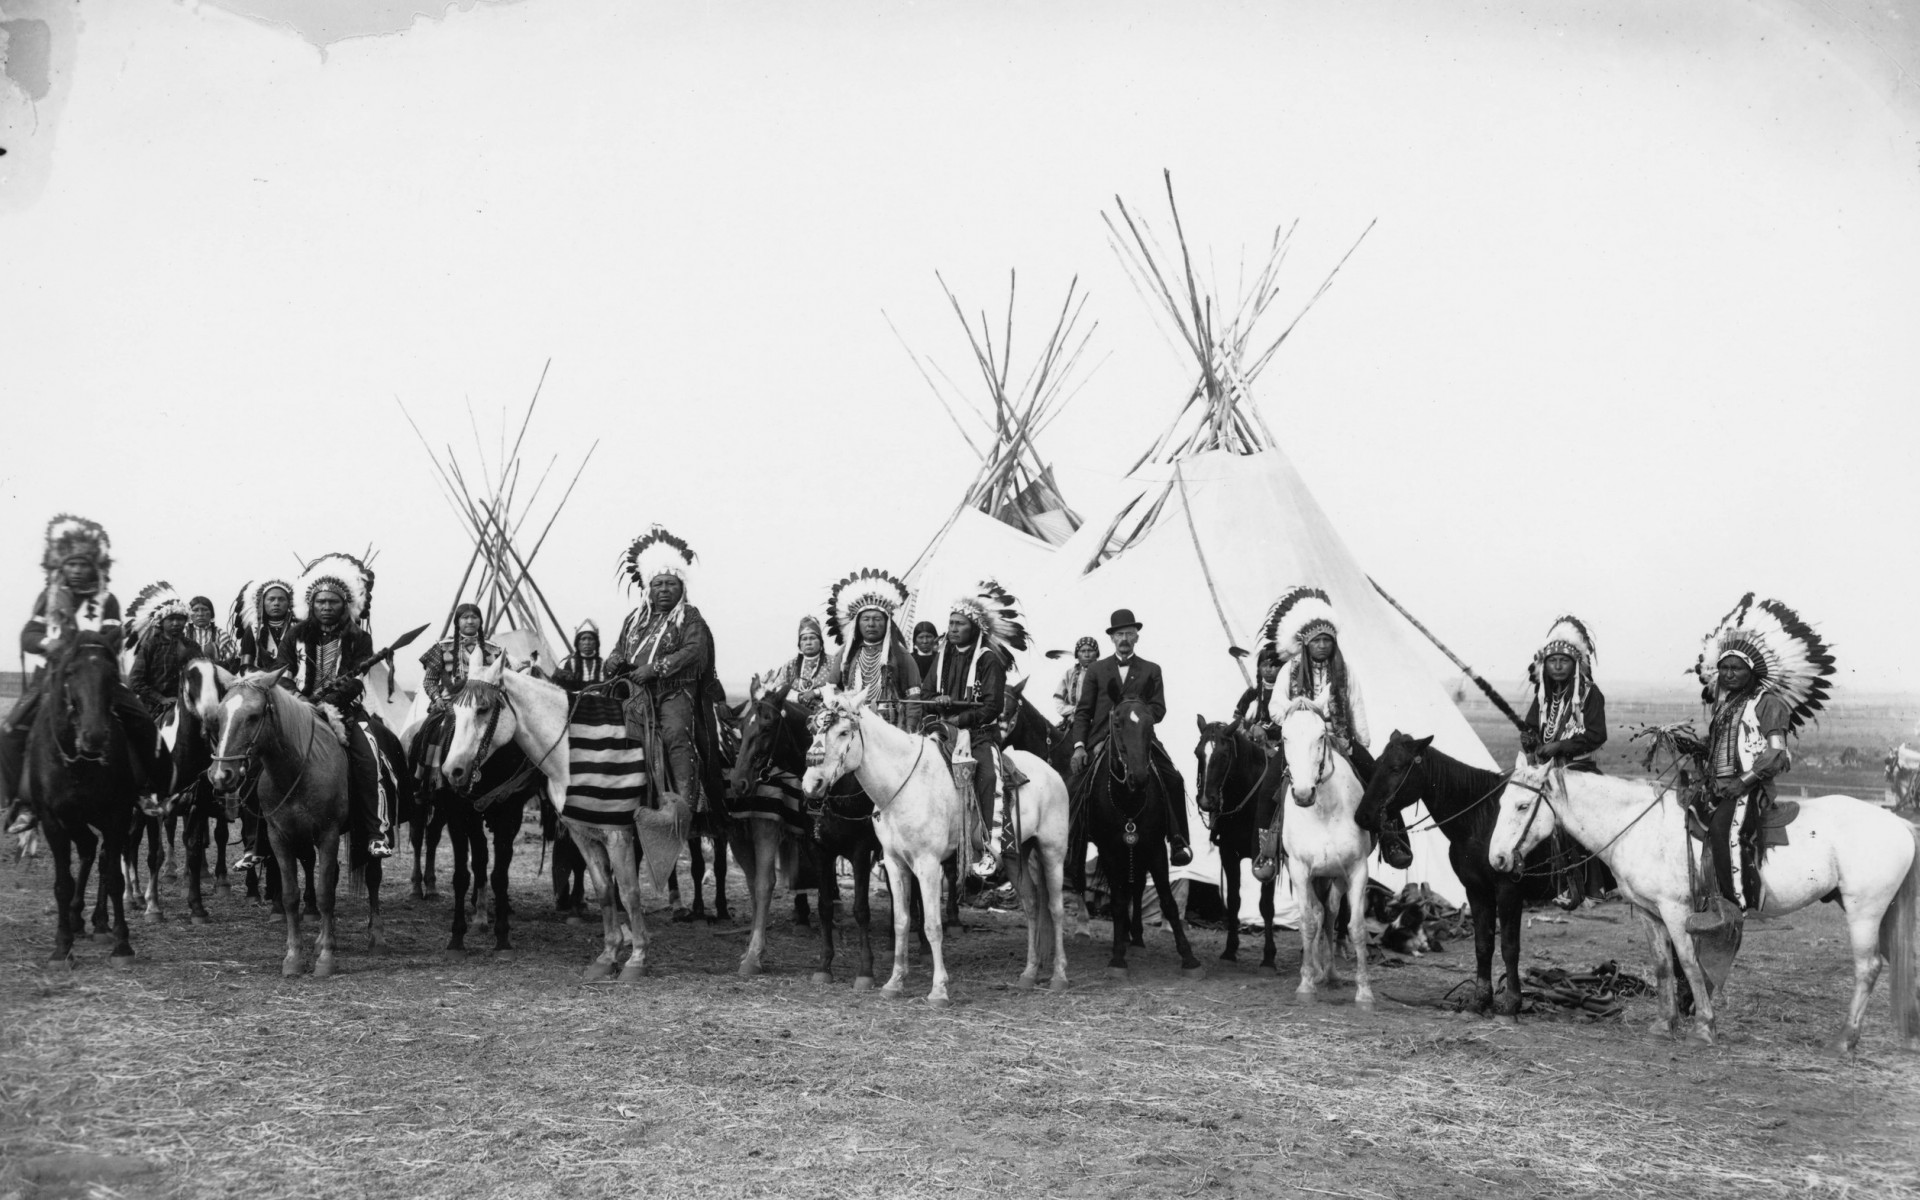 indians, Horses, Tepee, Feathers, Retro, Vintage, Photo, Black, White, Native, American, People, Crowd, History Wallpaper